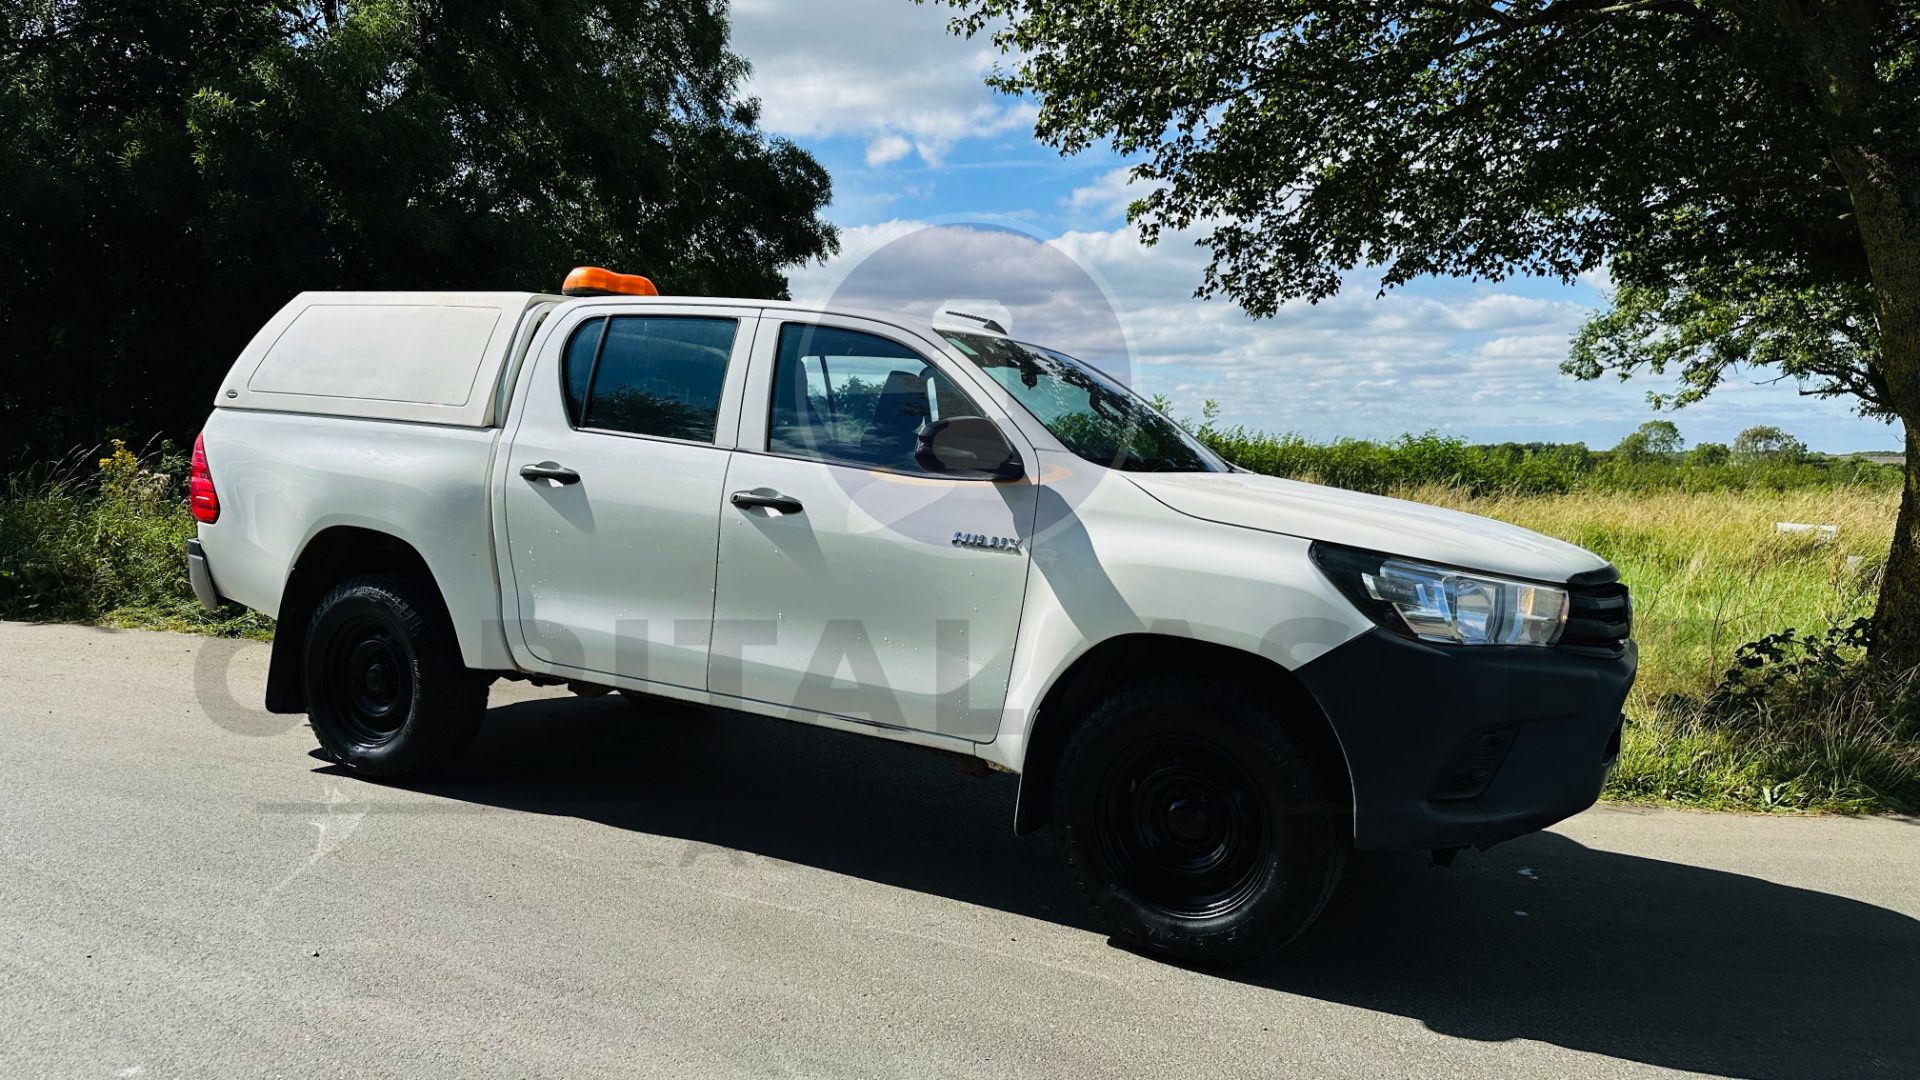 (ON SALE) TOYOTA HILUX *DOUBLE CAB PICK-UP* (2018 - EURO 6) 2.4 D-4D - AUTO STOP/START *AIR CON* - Image 2 of 41